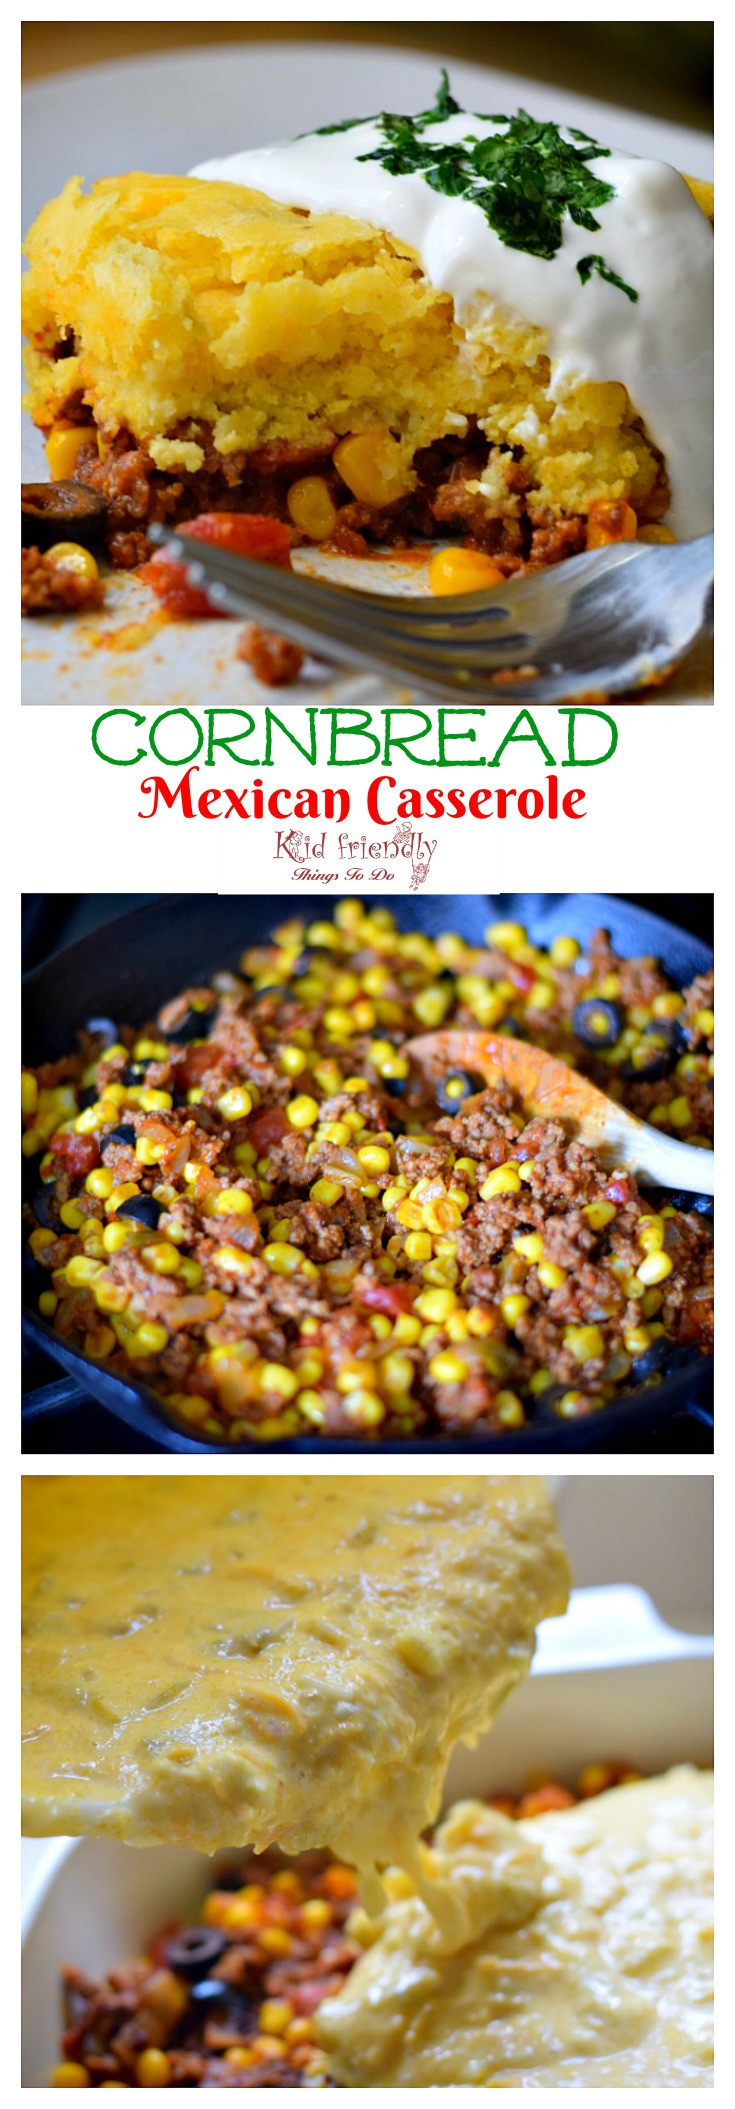 Mexican Casserole With Ground Beef
 Cornbread and Ground Beef Mexican Casserole Recipe